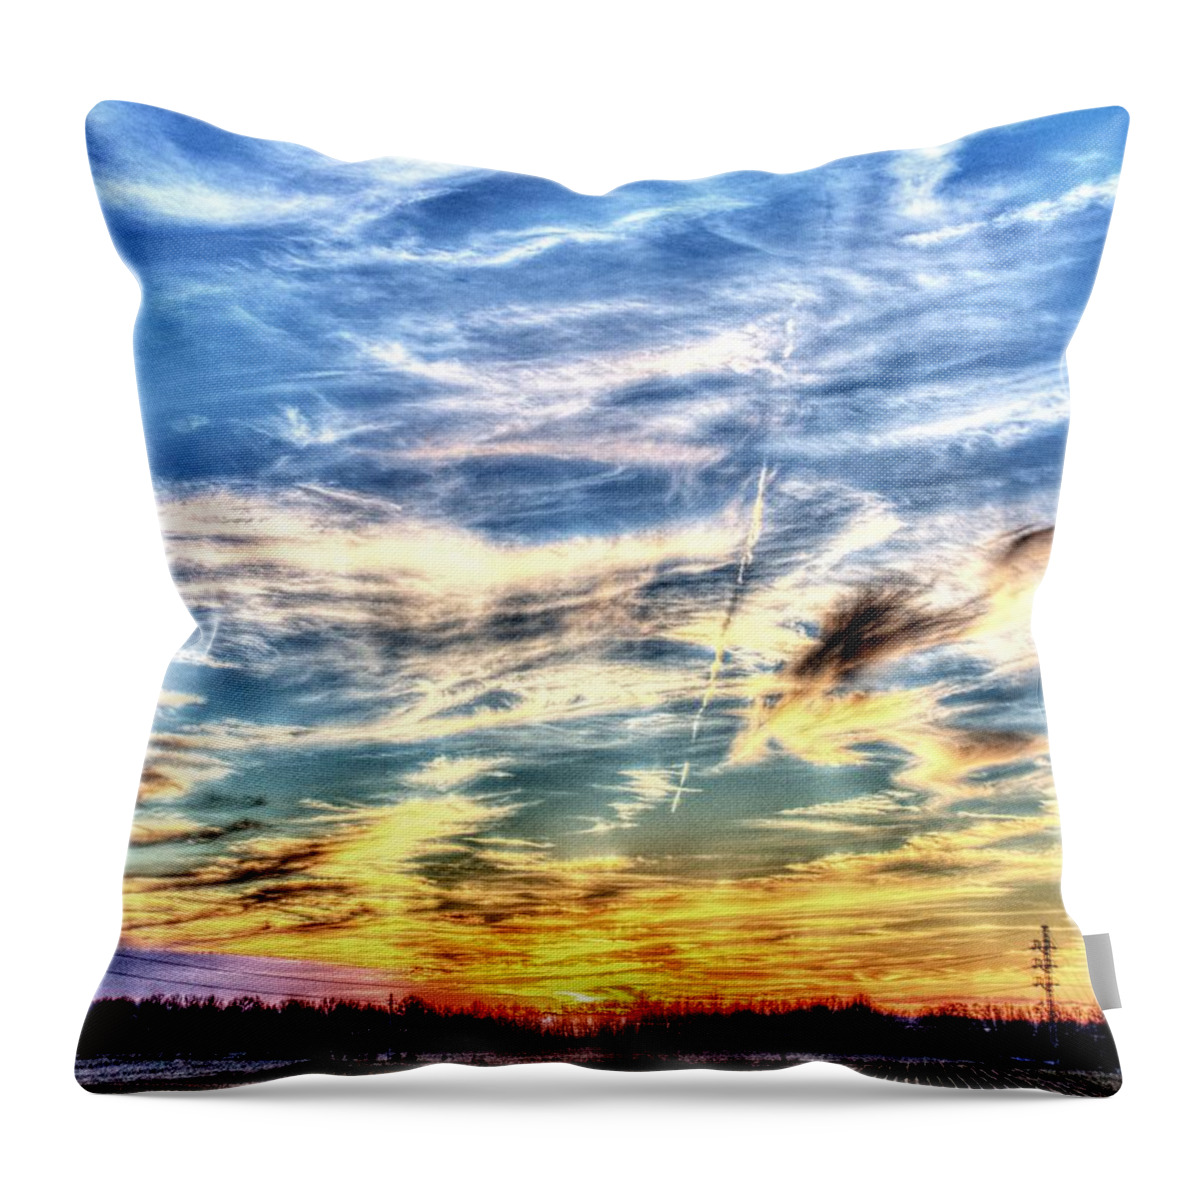 Sunset Throw Pillow featuring the photograph Sunset Clouds by David Zarecor